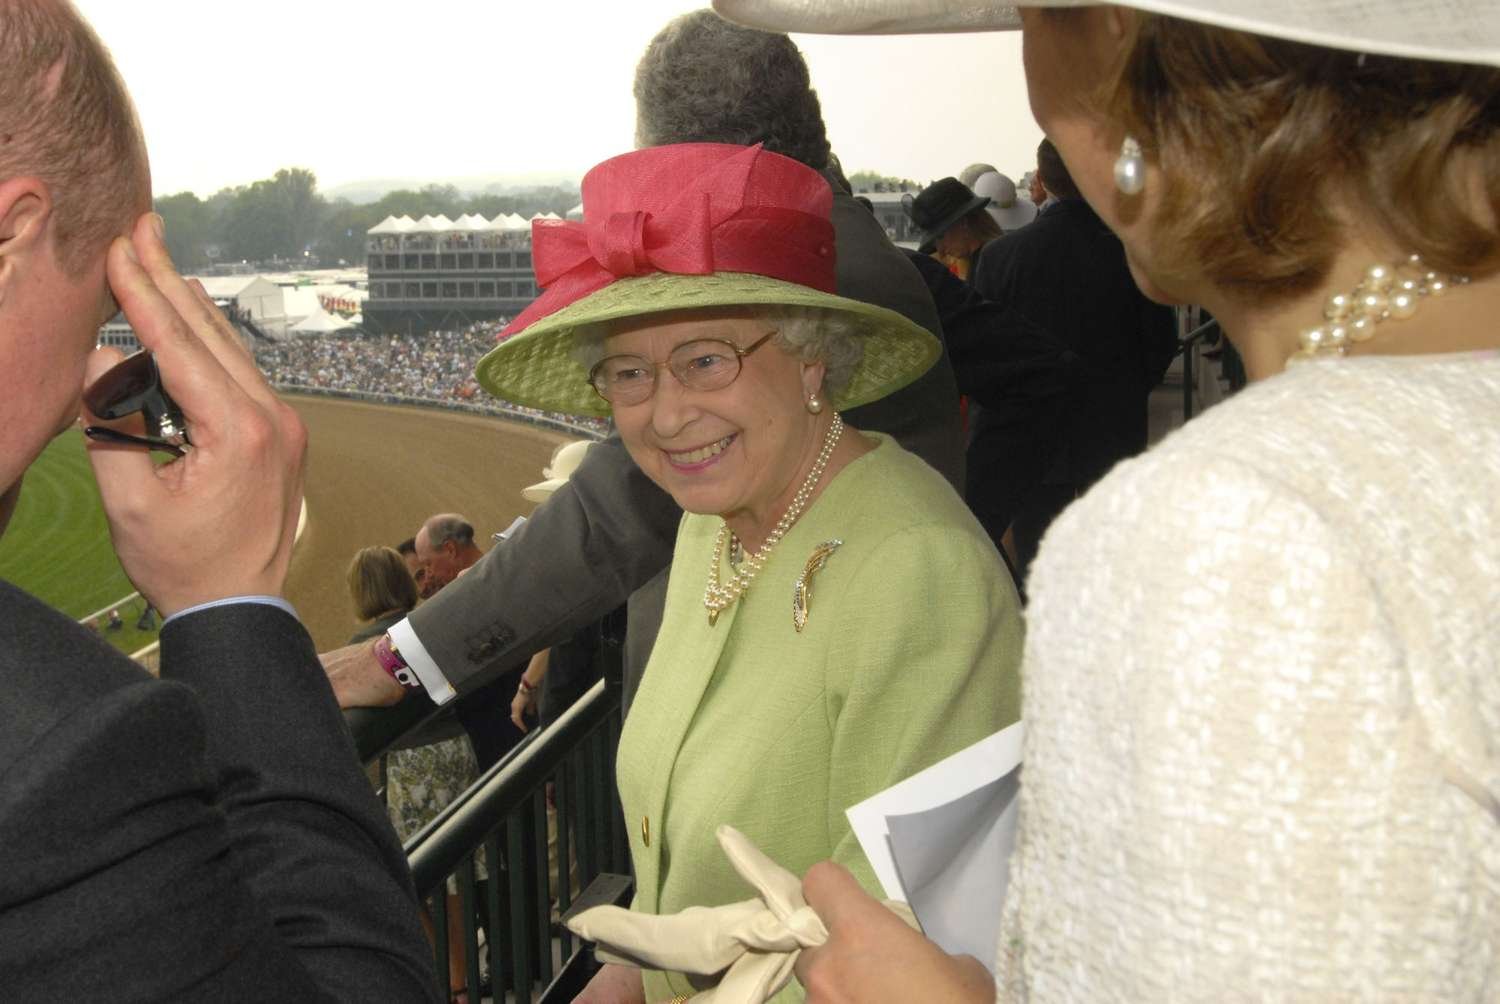 We have to give a nod to our friends in the UK for inspiring  the Kentucky Derby. 

The Derby was started by Lewis Clark Jr. &ndash; grandson of William Clark, half of the famous explorer duo Lewis and Clark &ndash; after he saw England's Epsom Derby